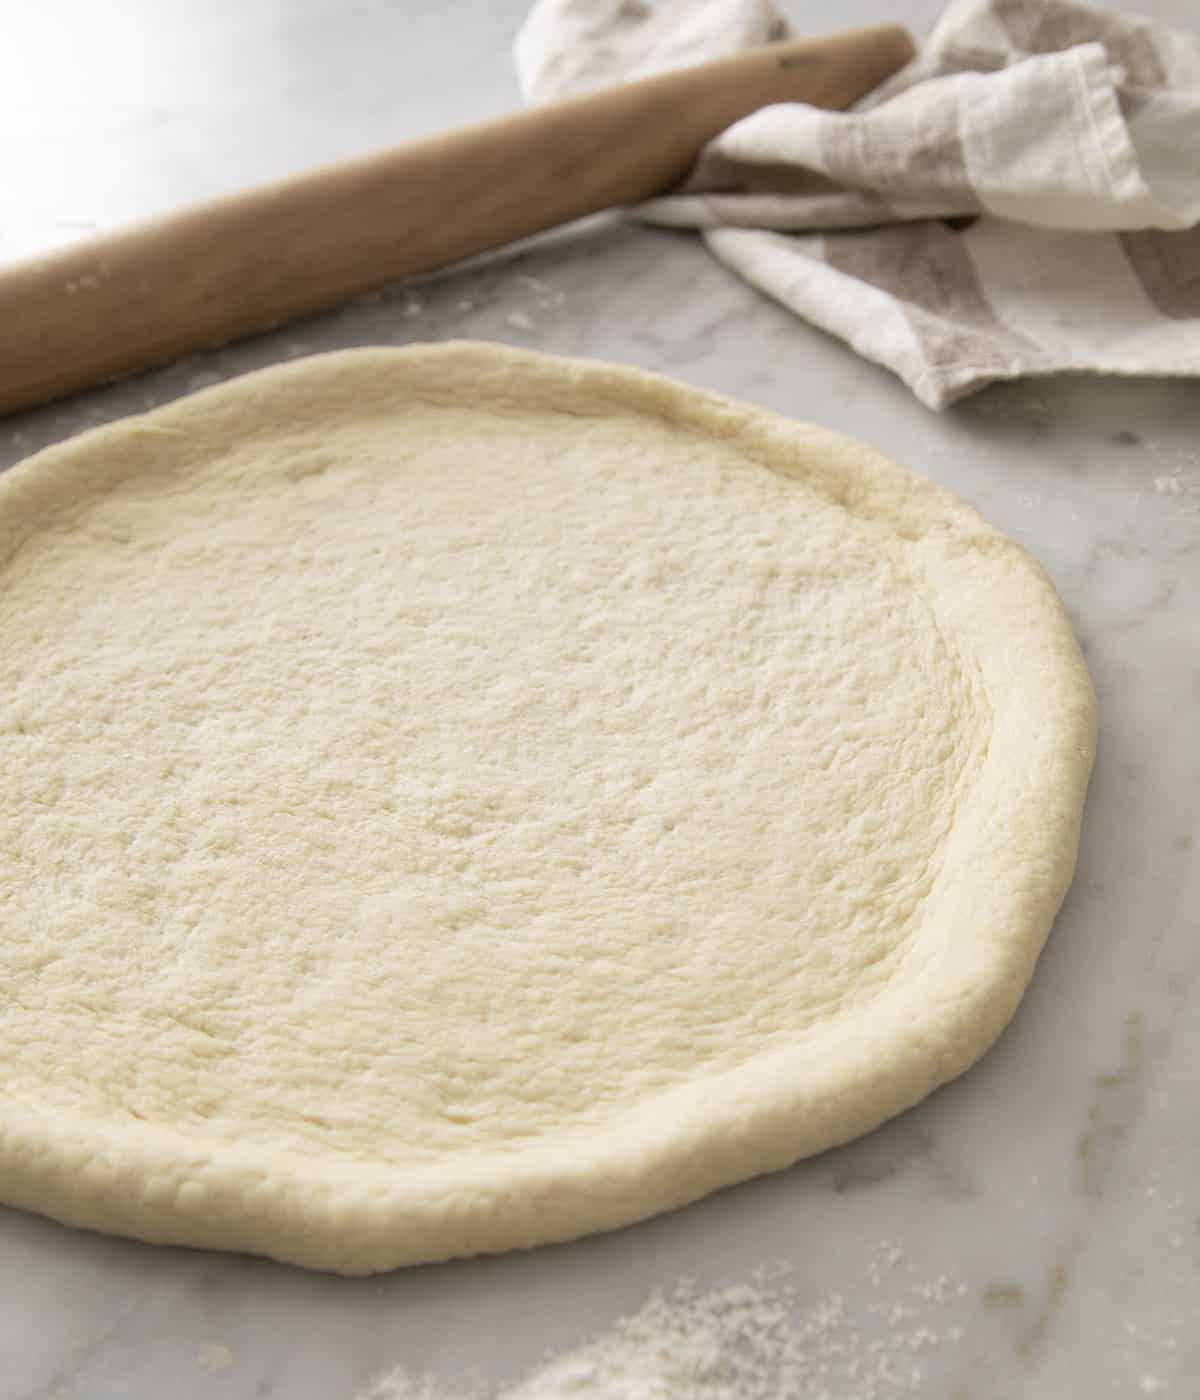 A pizza crust ready for sauce and cheese to be added.